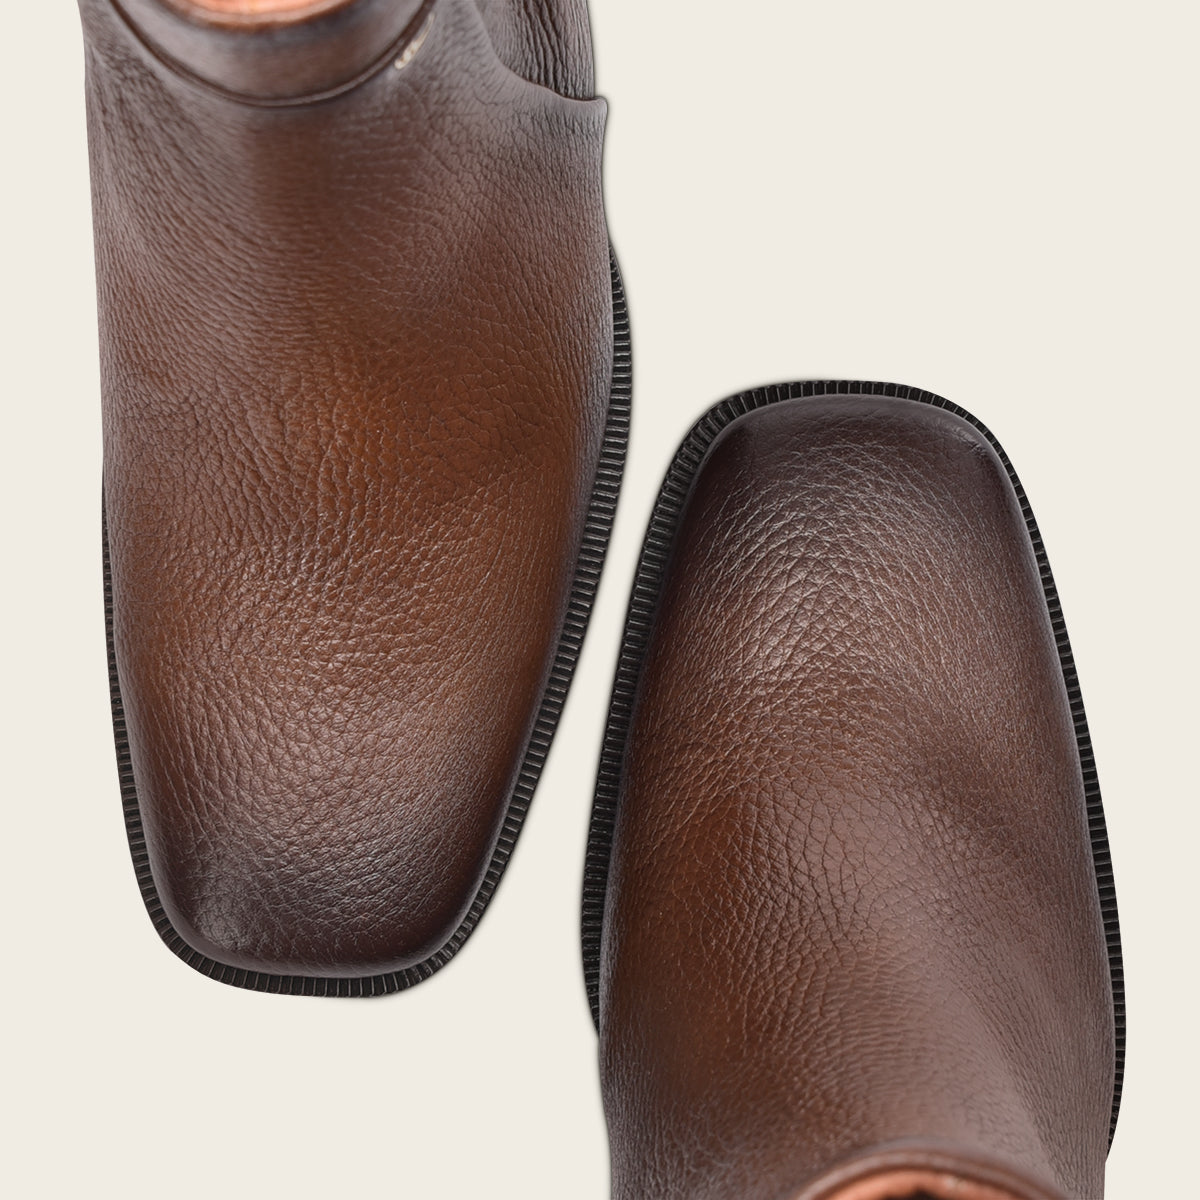 Honey brown leather minimalistic and elegant bootie